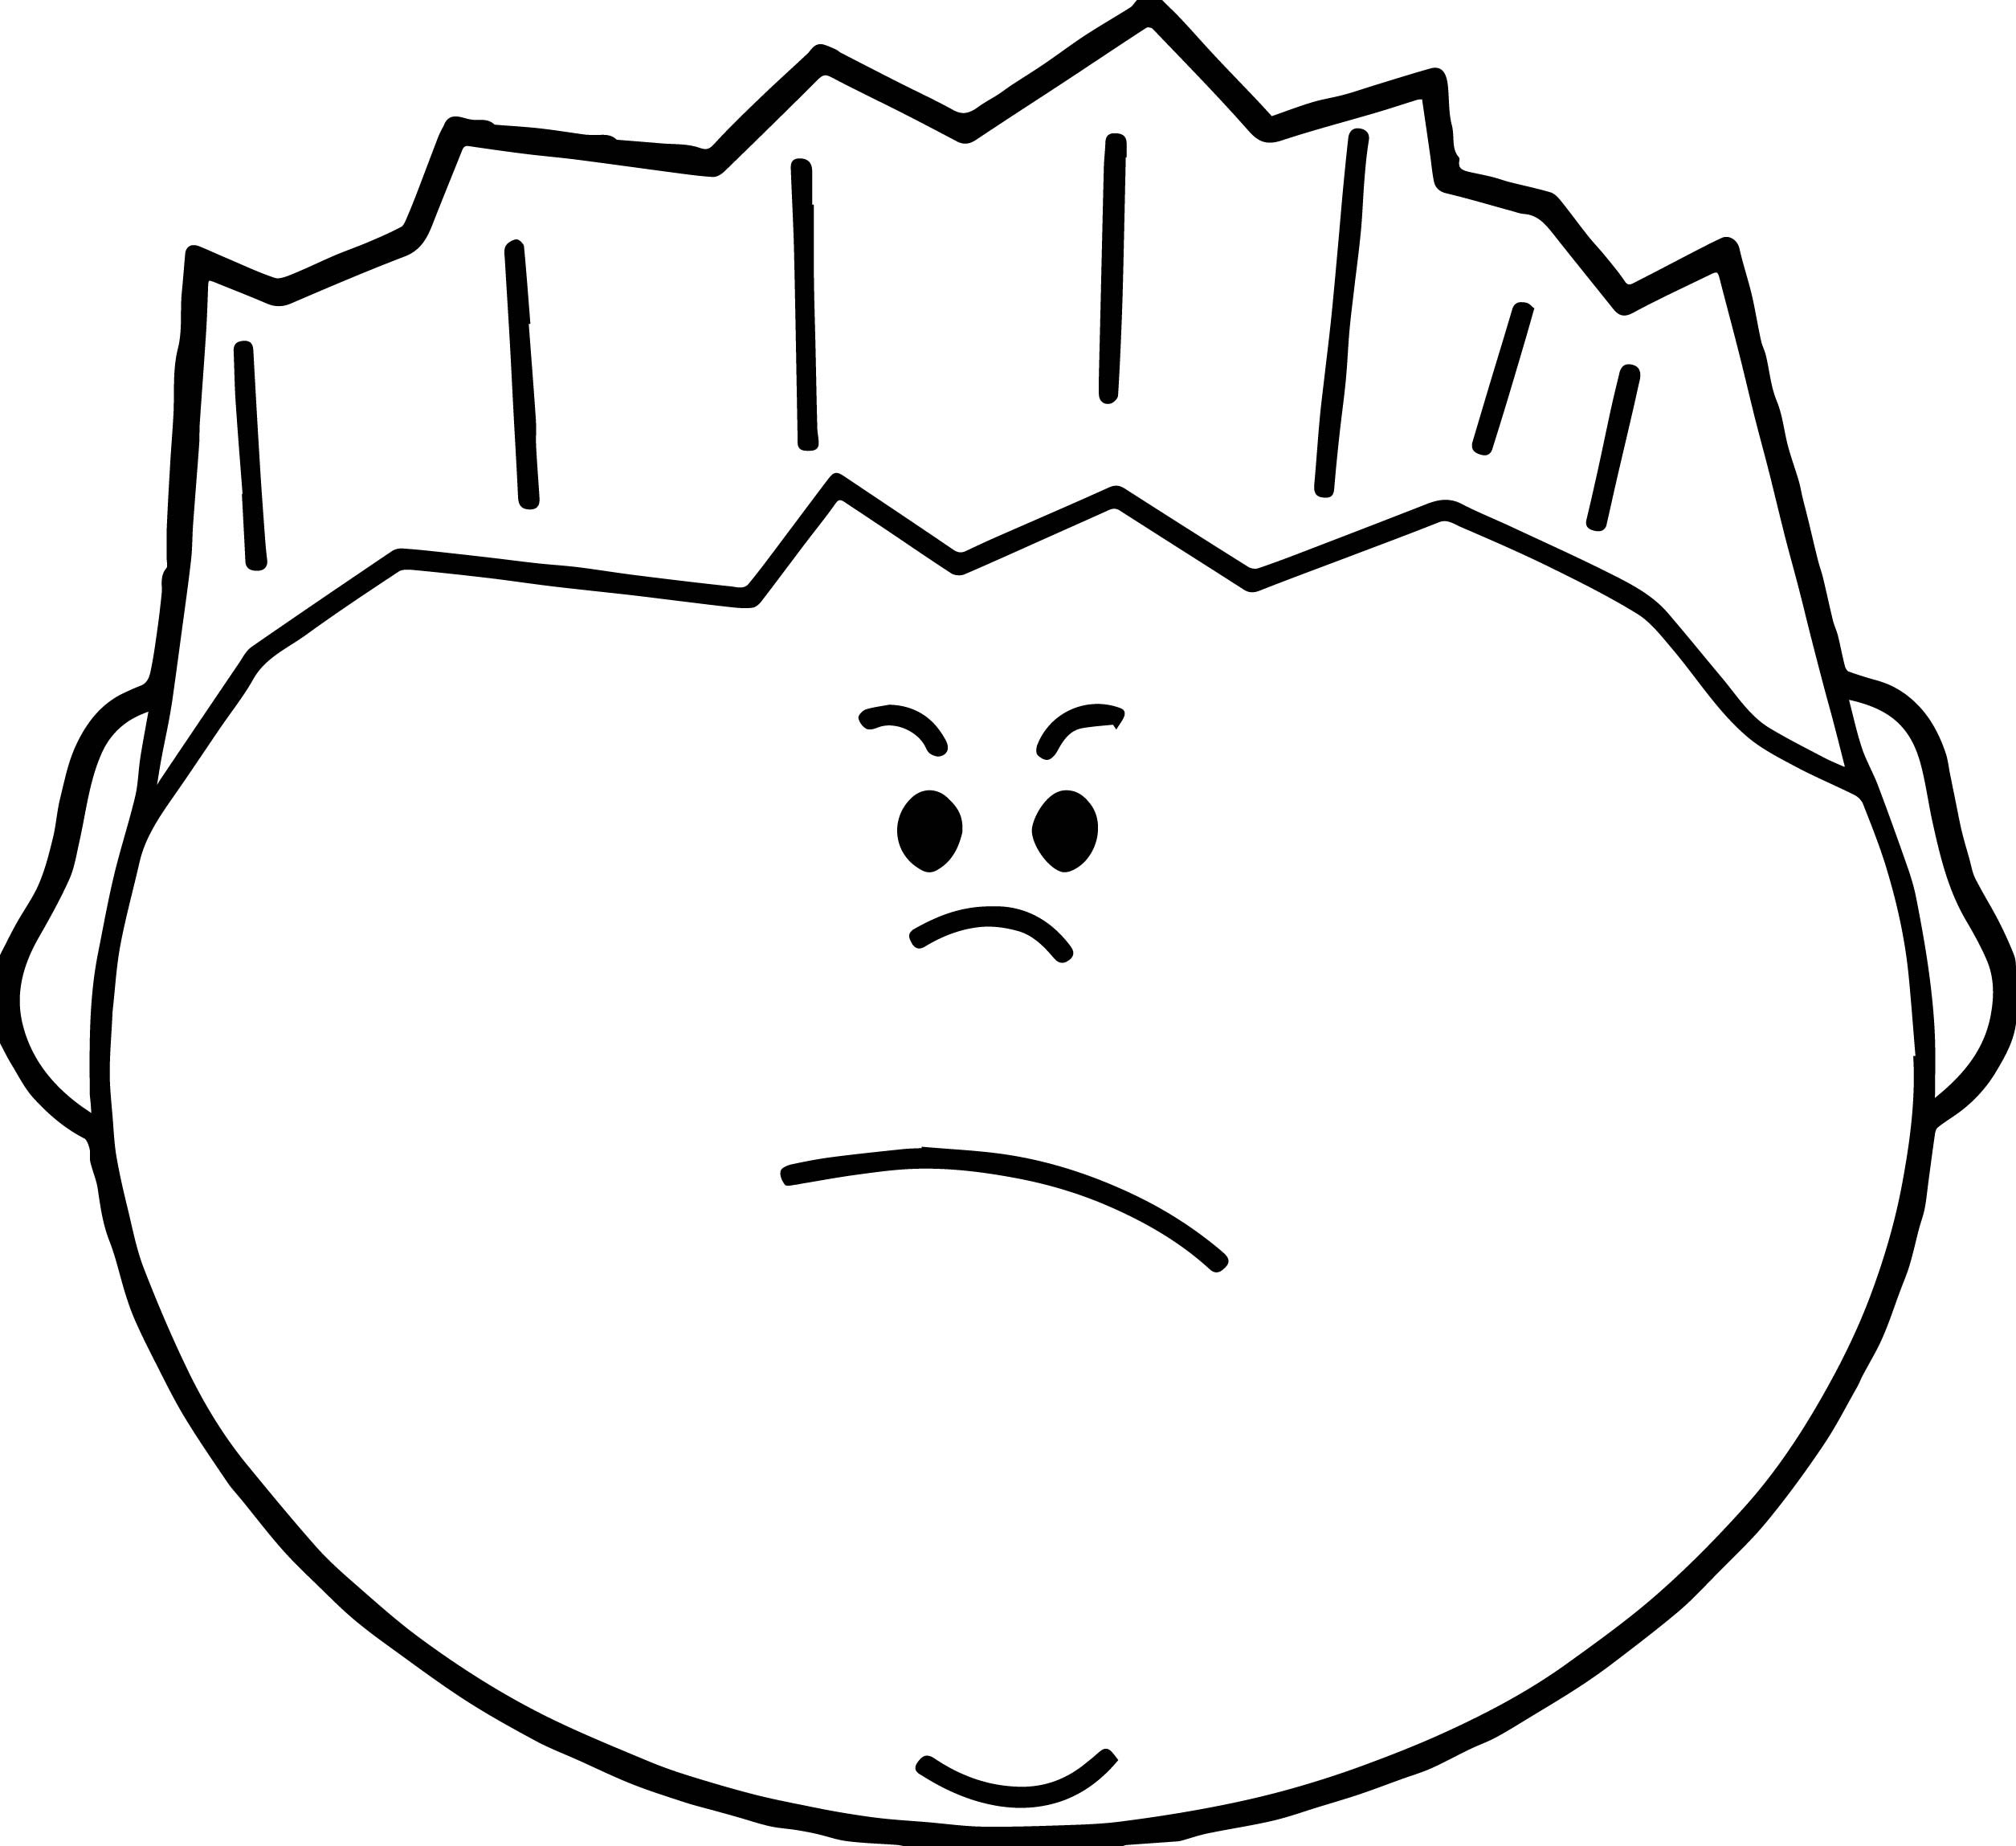 Boys Face Coloring Pages
 Angry Boy Face Coloring Page